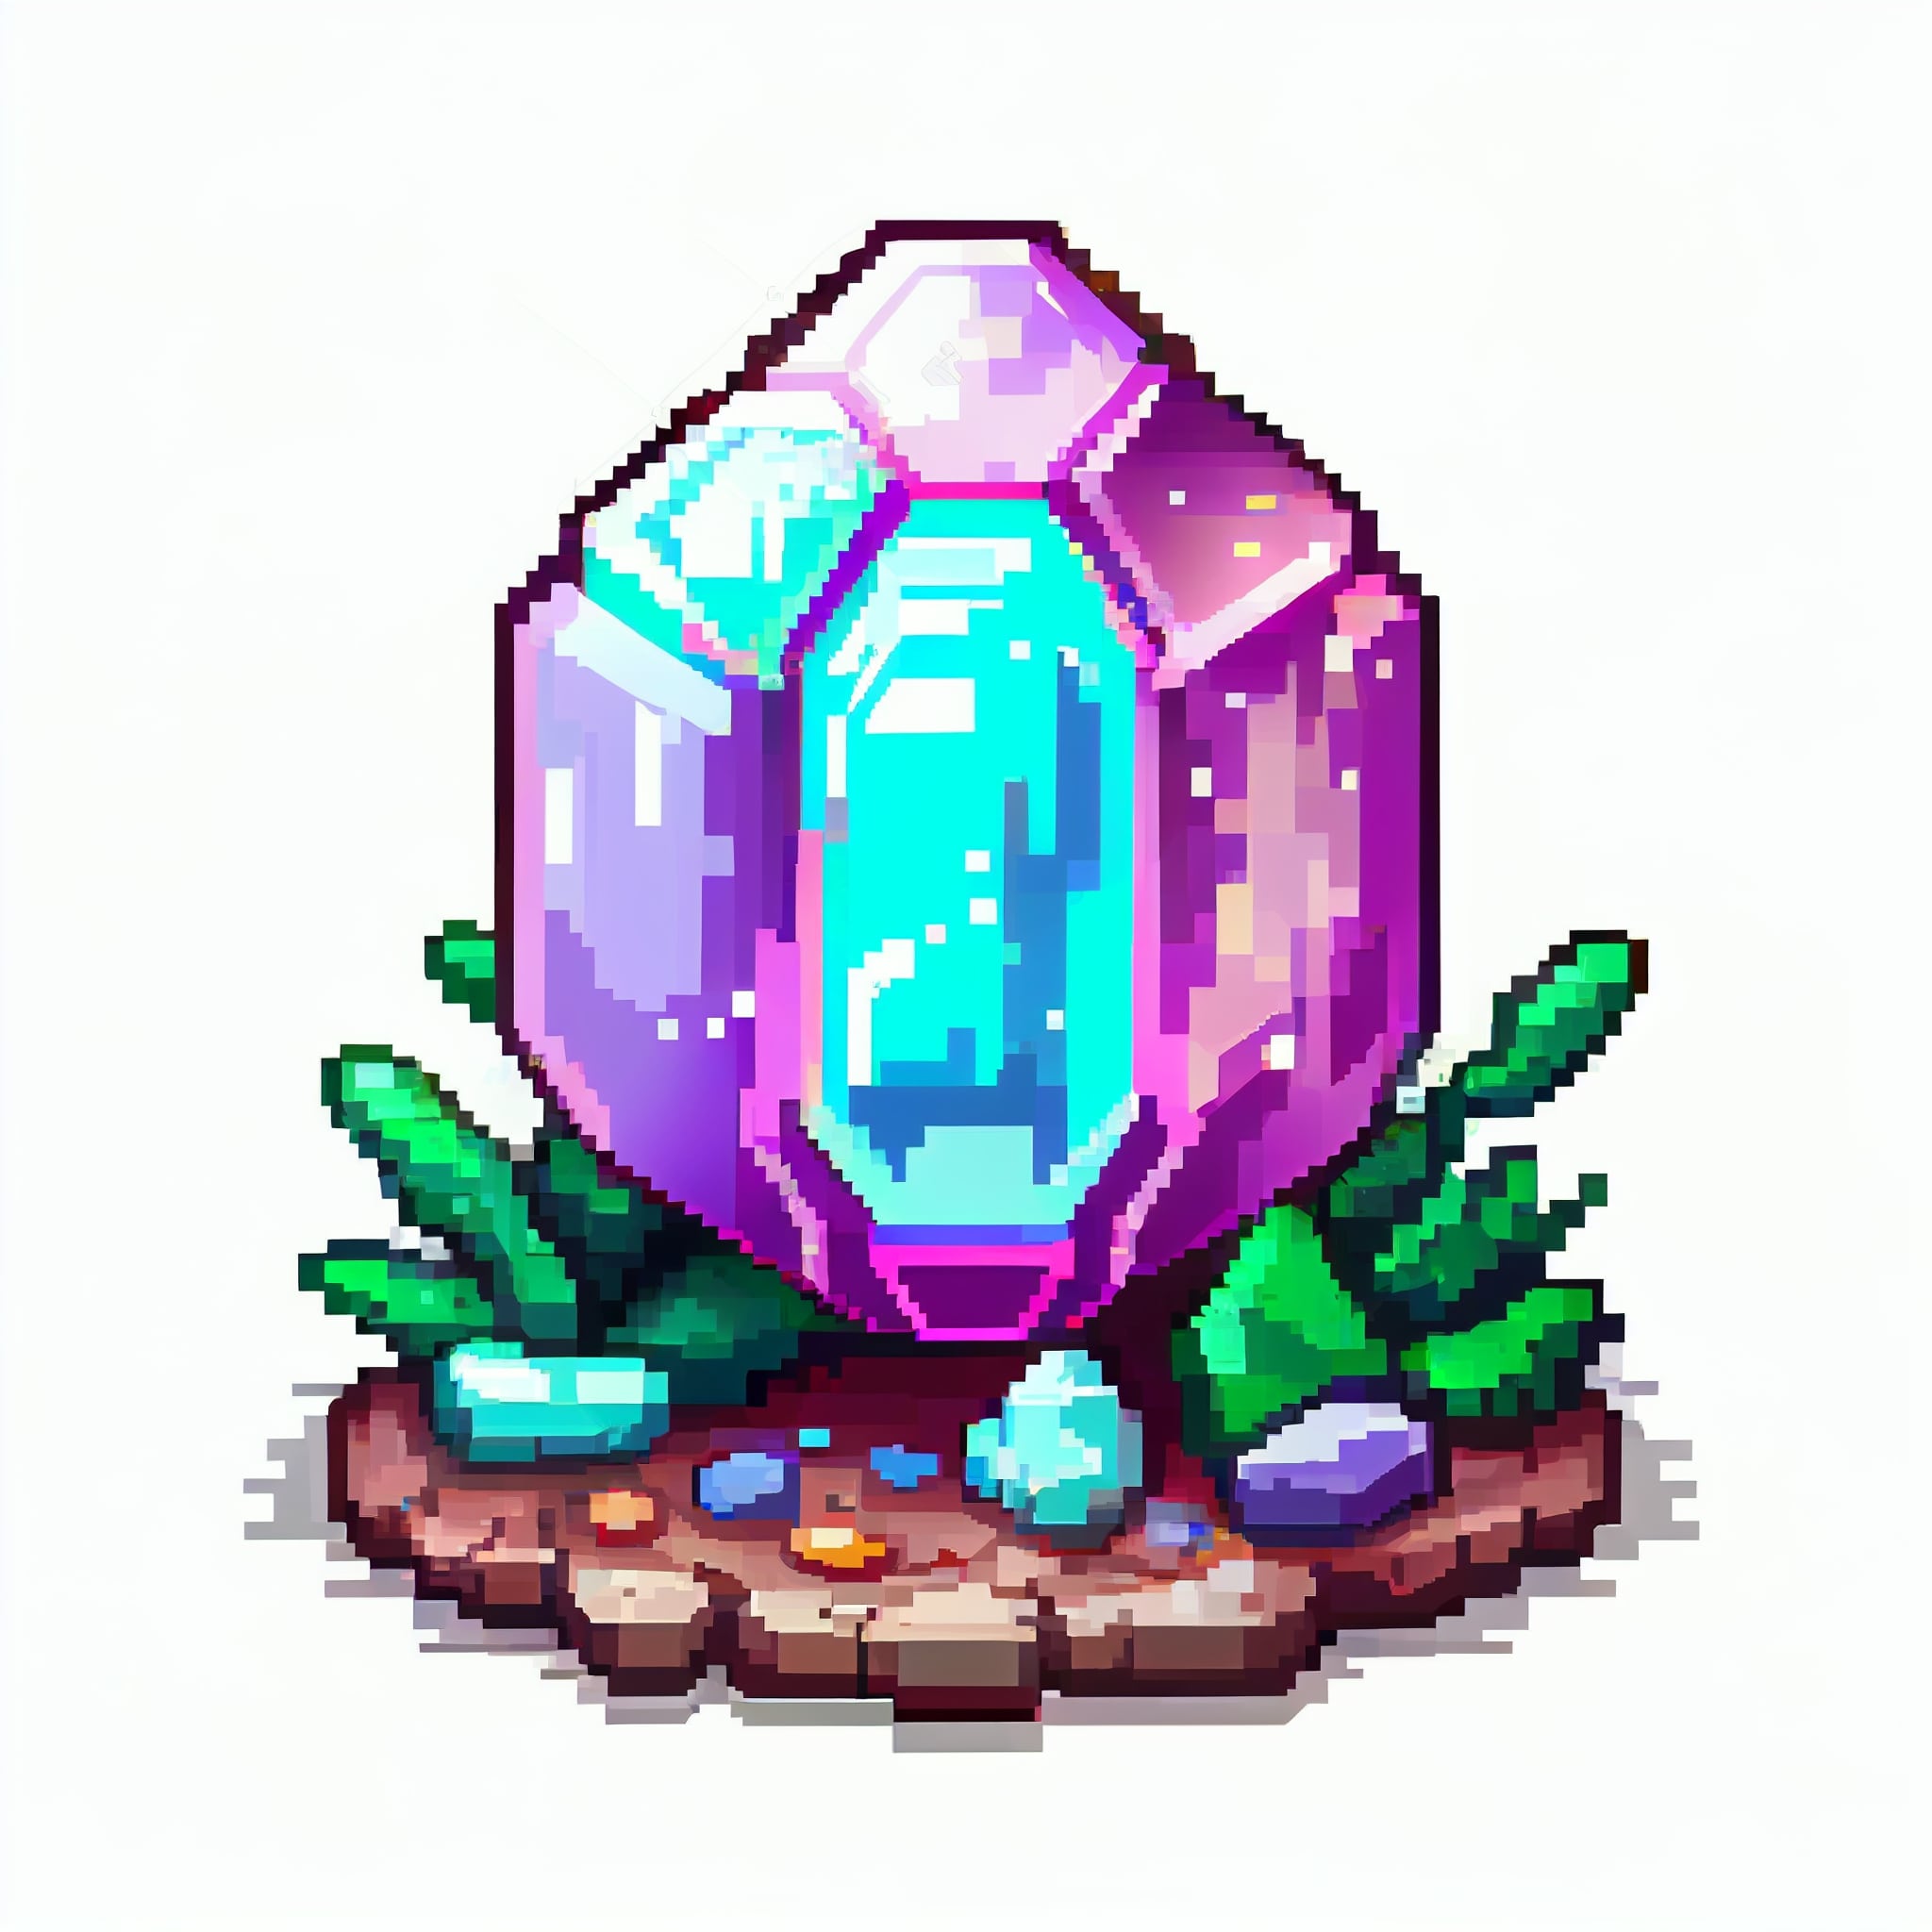 Pixel art picture of a pink diamond.